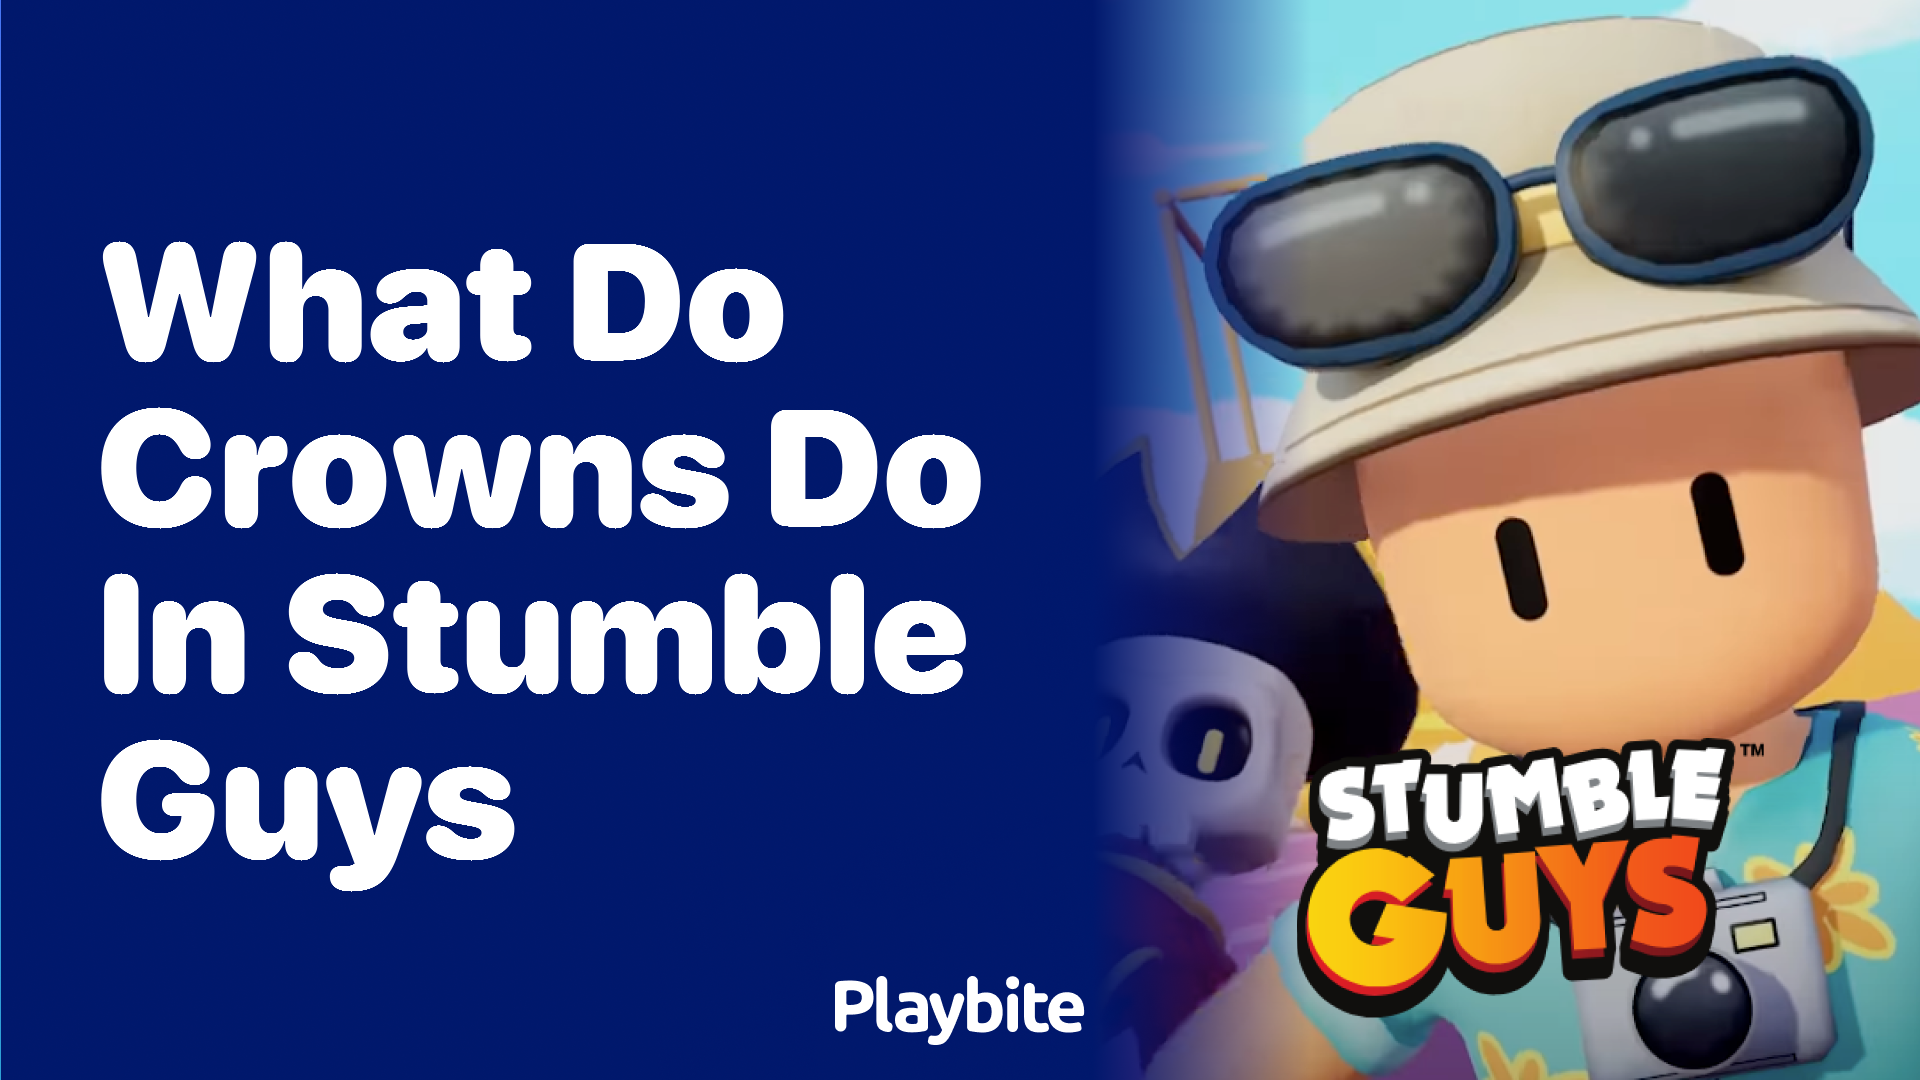 What Do Crowns Do in Stumble Guys?